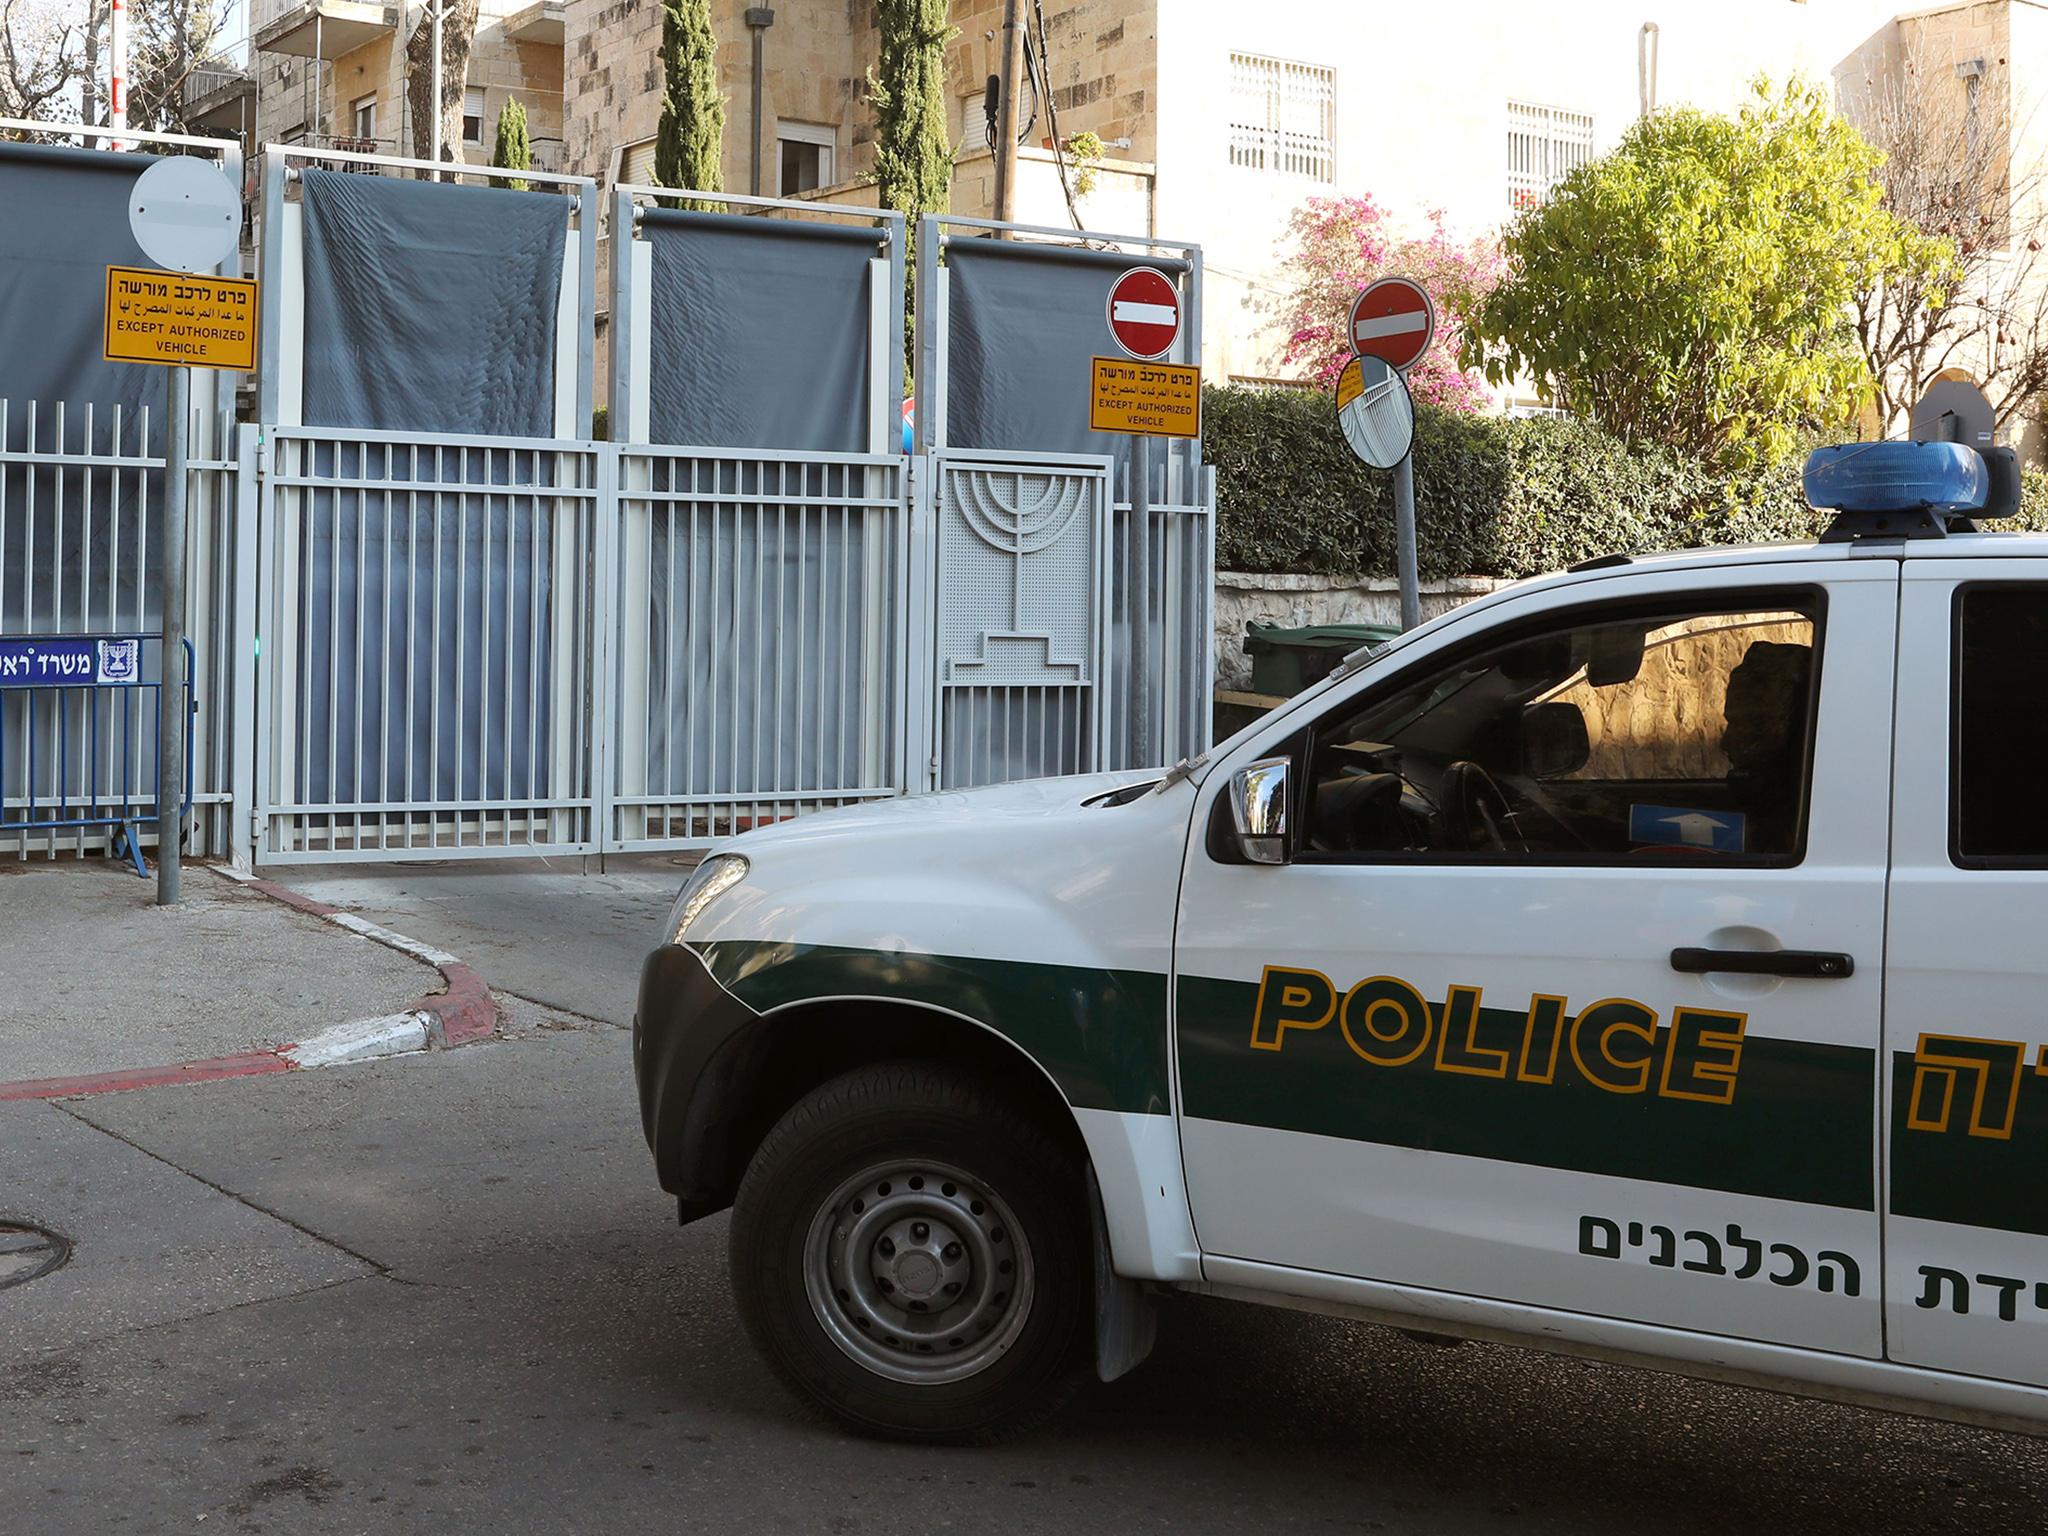 Israeli police said they received reports from neighbours concerned that someone was being held captive in the apartment